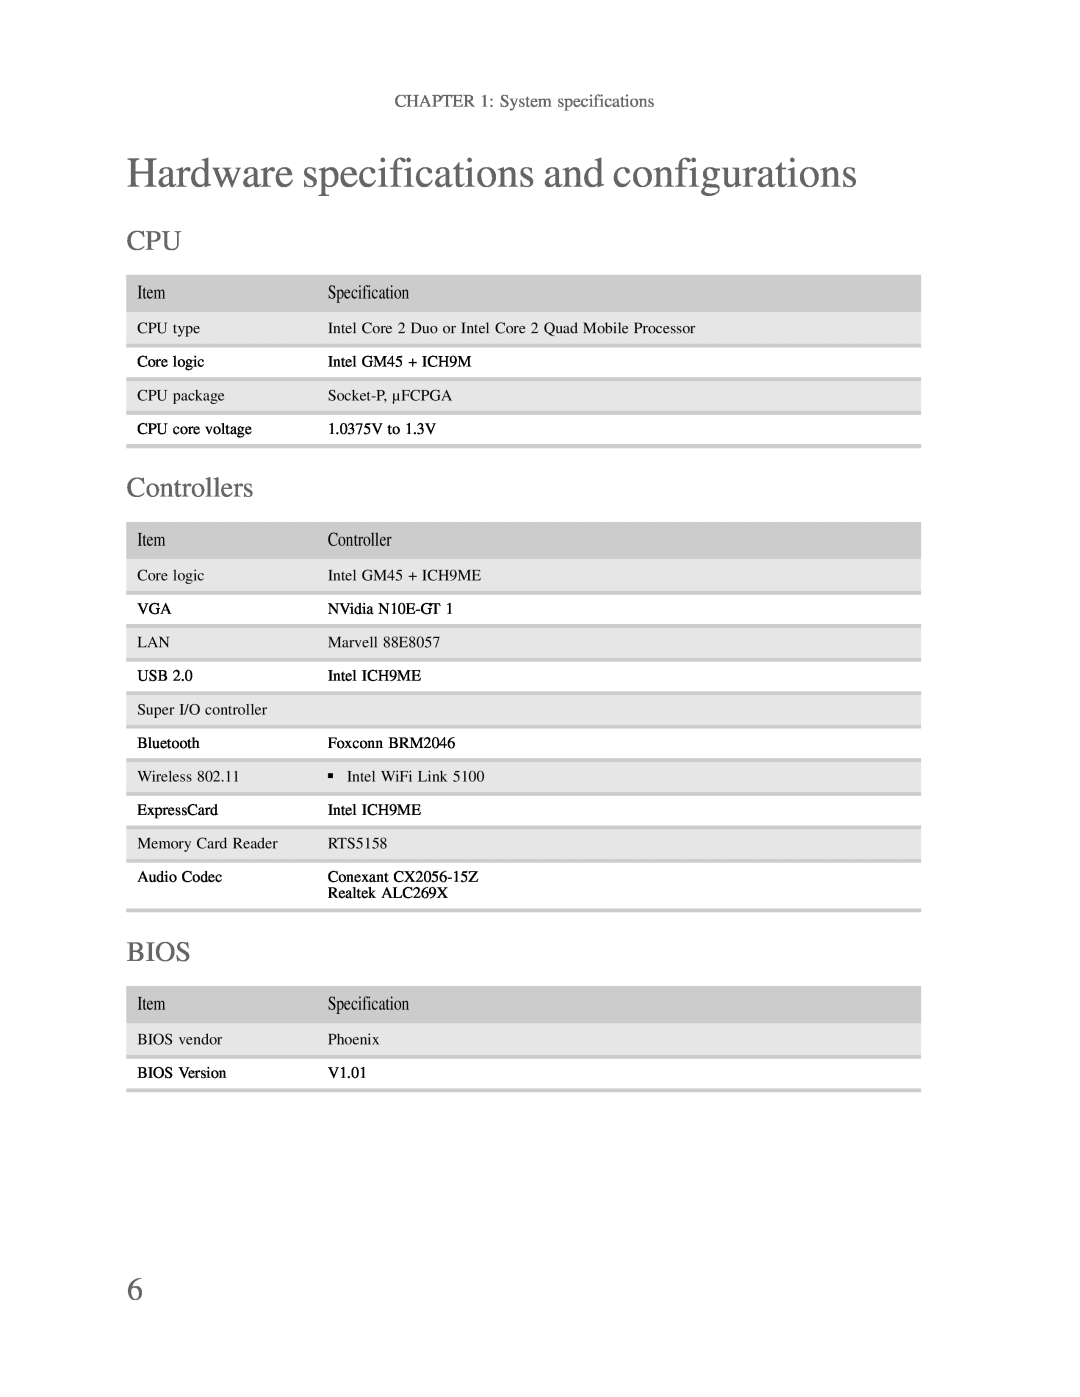 Gateway p-79 manual Hardware specifications and configurations, Controllers, Bios, System specifications 